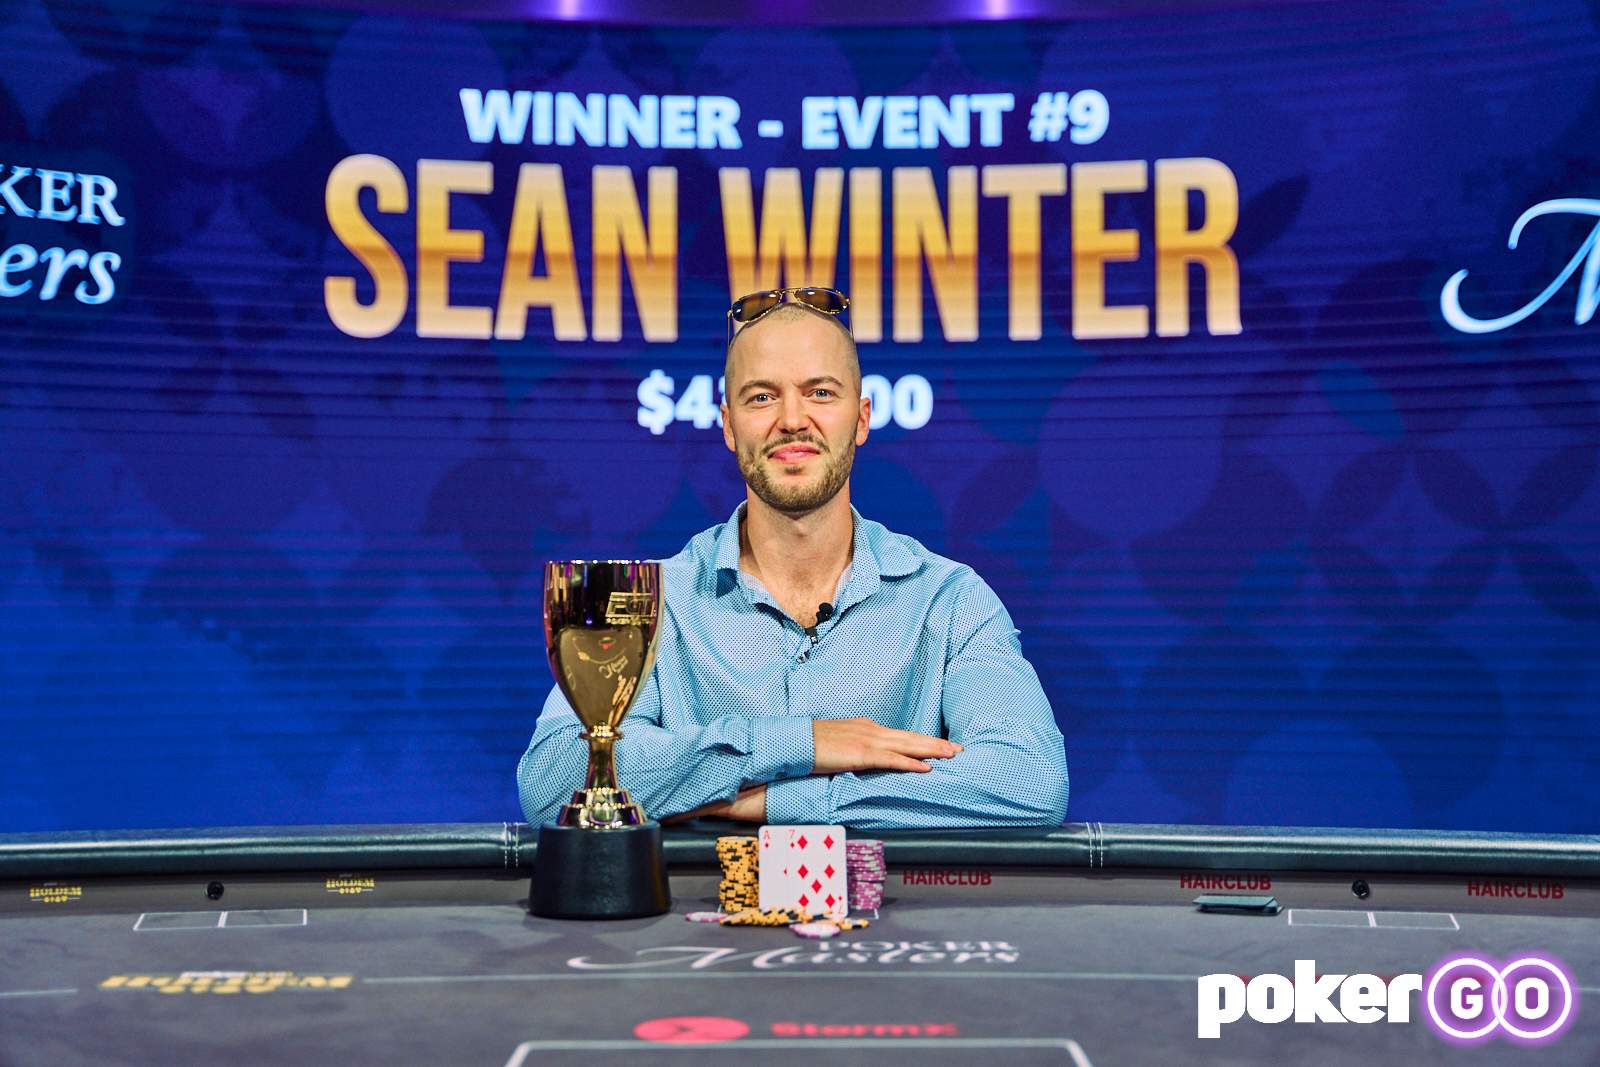 Sean Winter Wins Event #9 at 2022 Poker Masters for $432,000